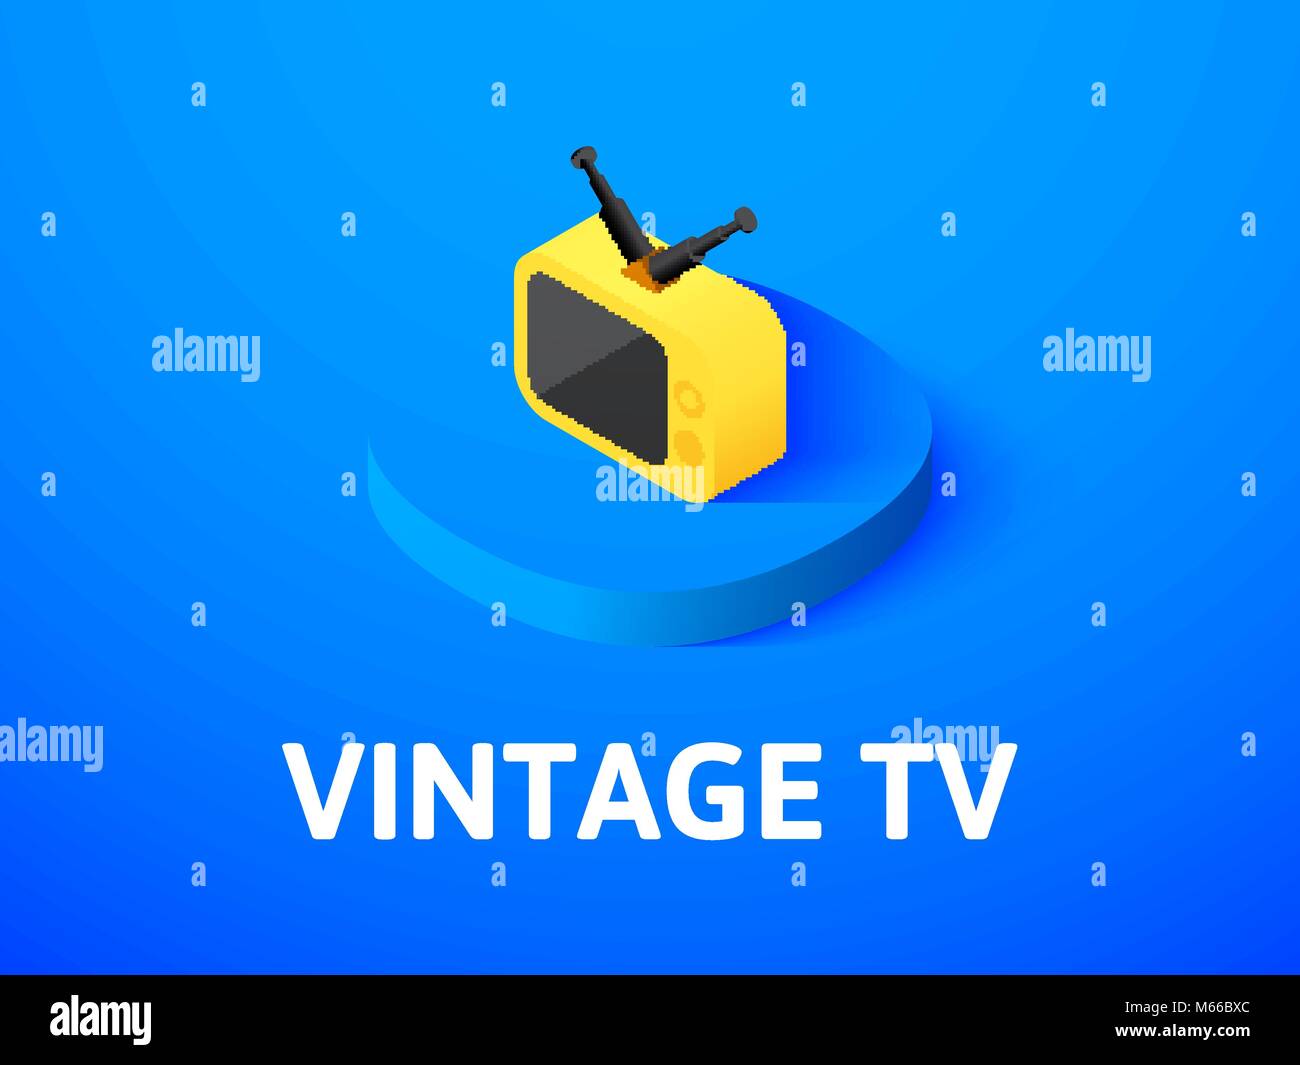 Vintage TV isometric icon, isolated on color background Stock Vector